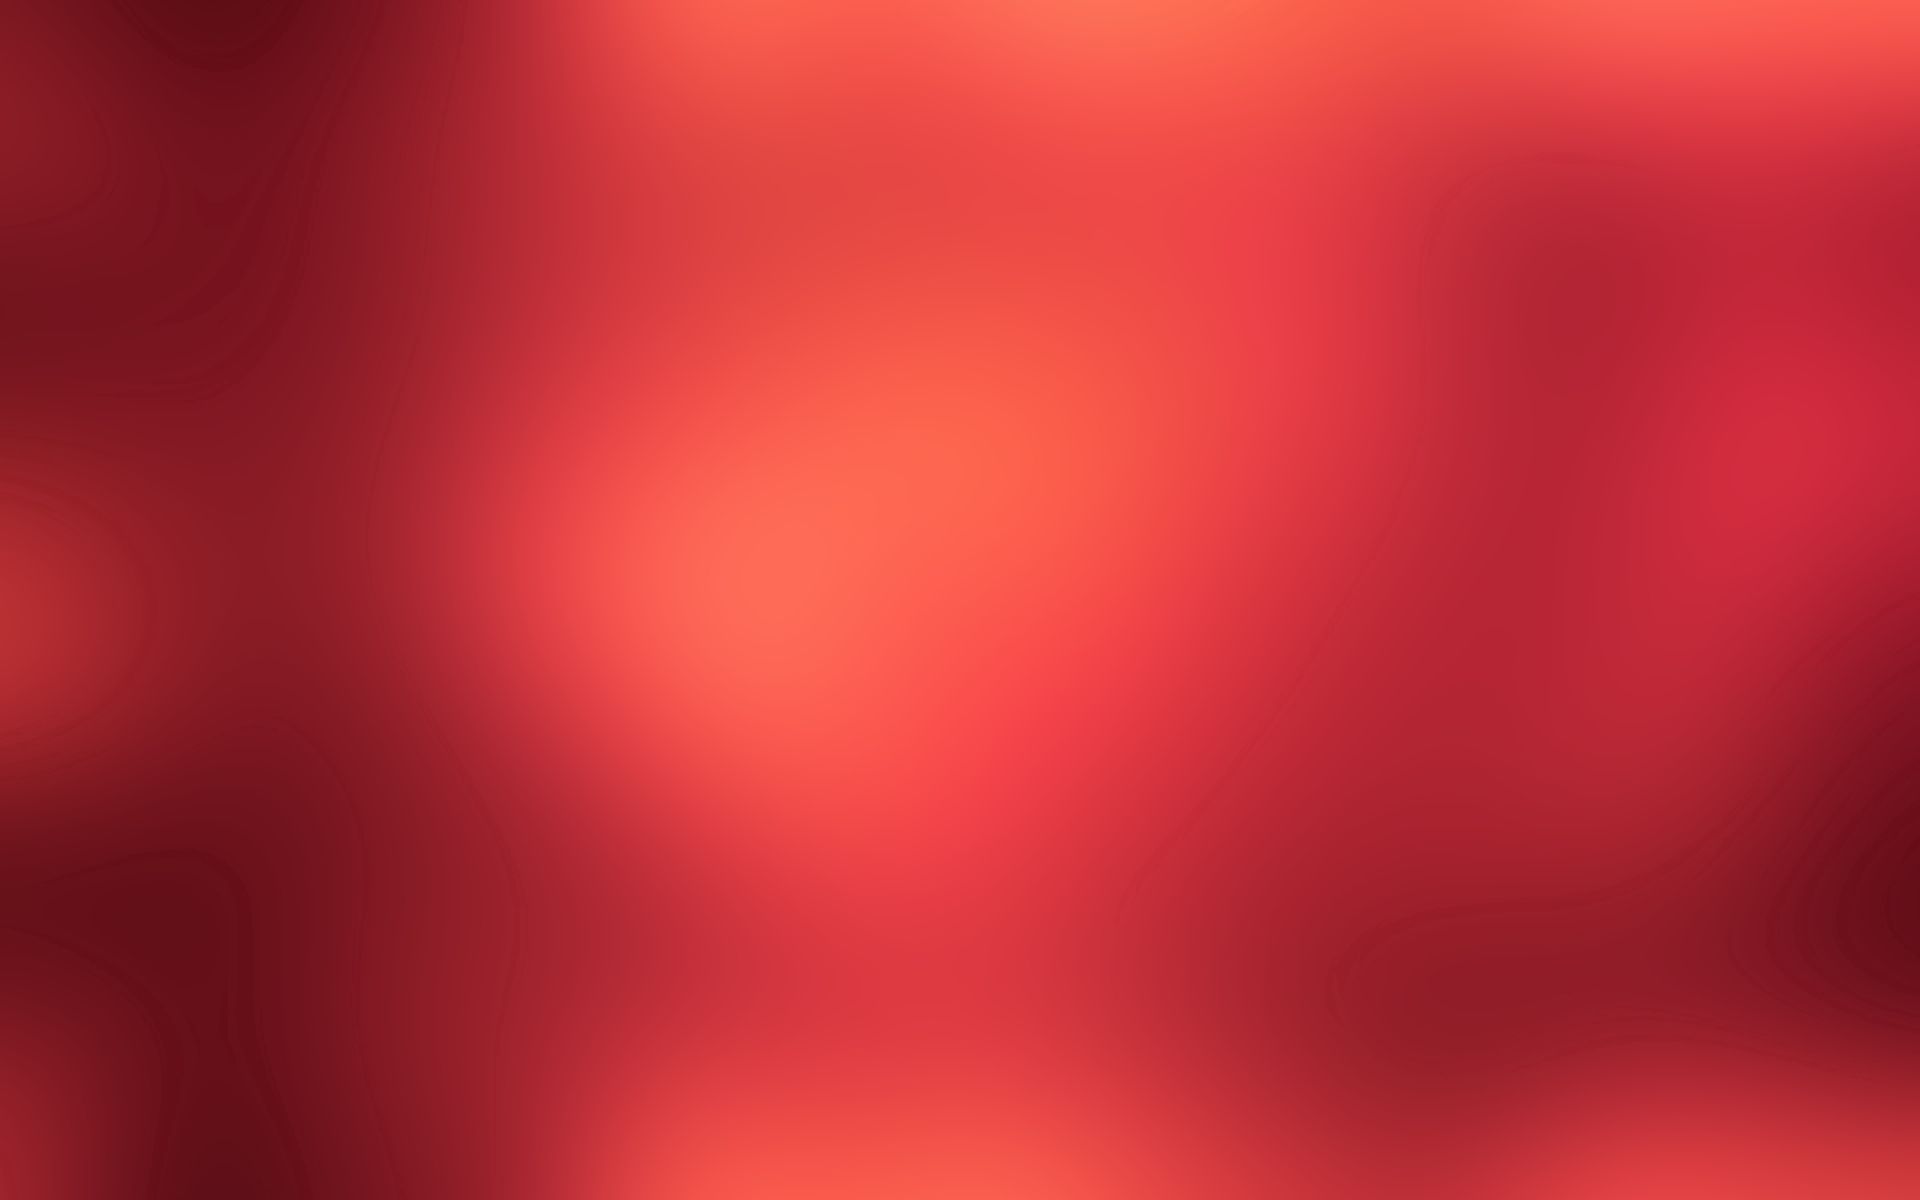 Solid red, bright, shine, abstract Free Stock Photos